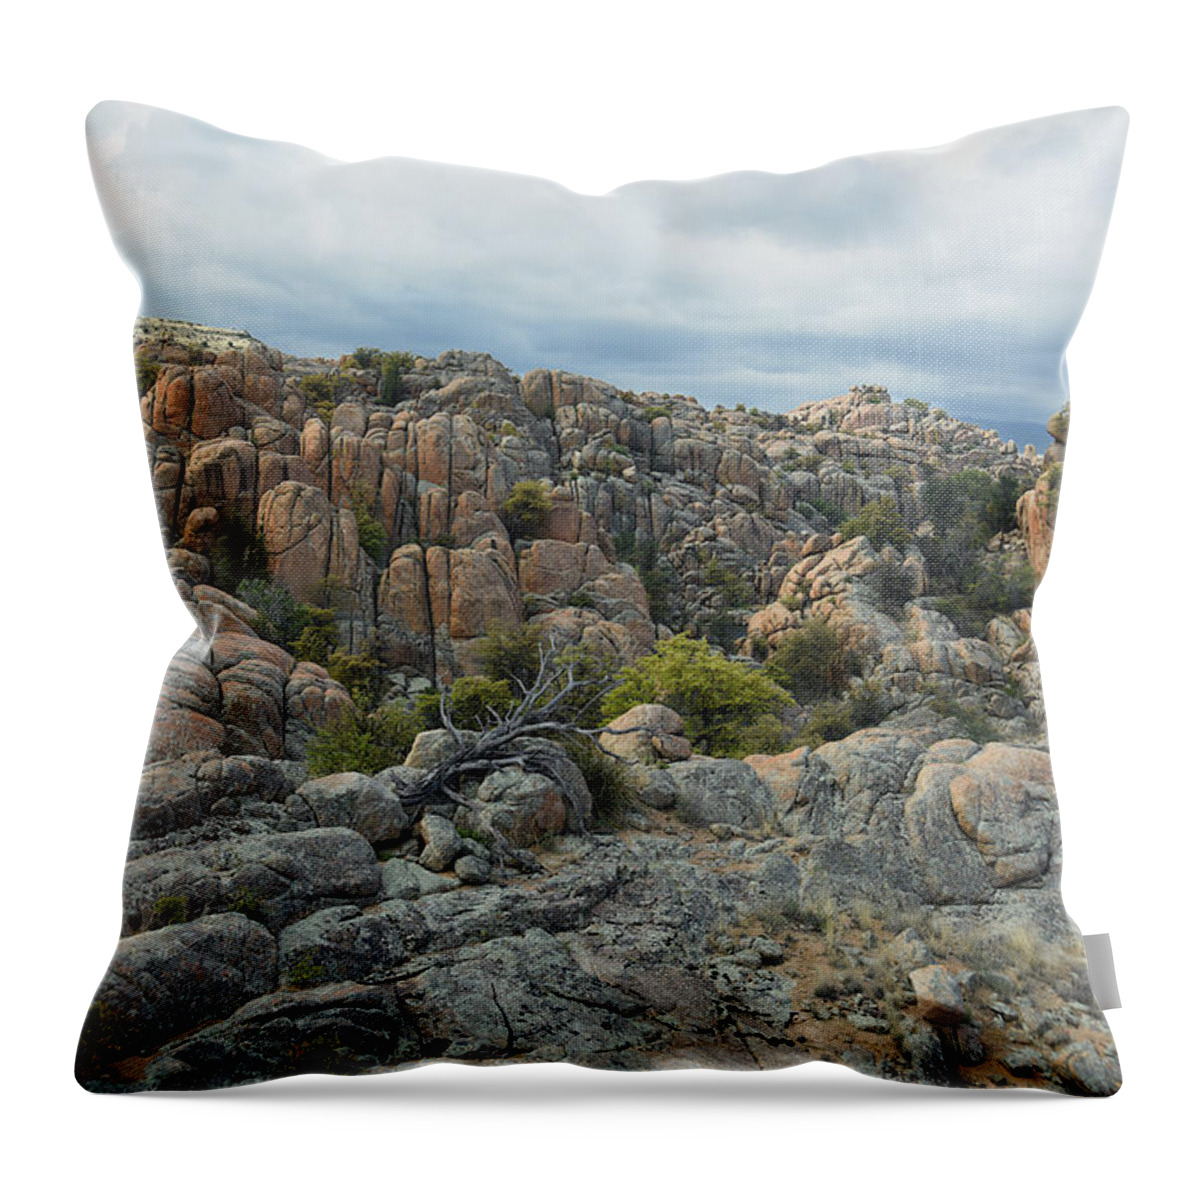 Photograph Throw Pillow featuring the photograph The Dells by Richard Gehlbach